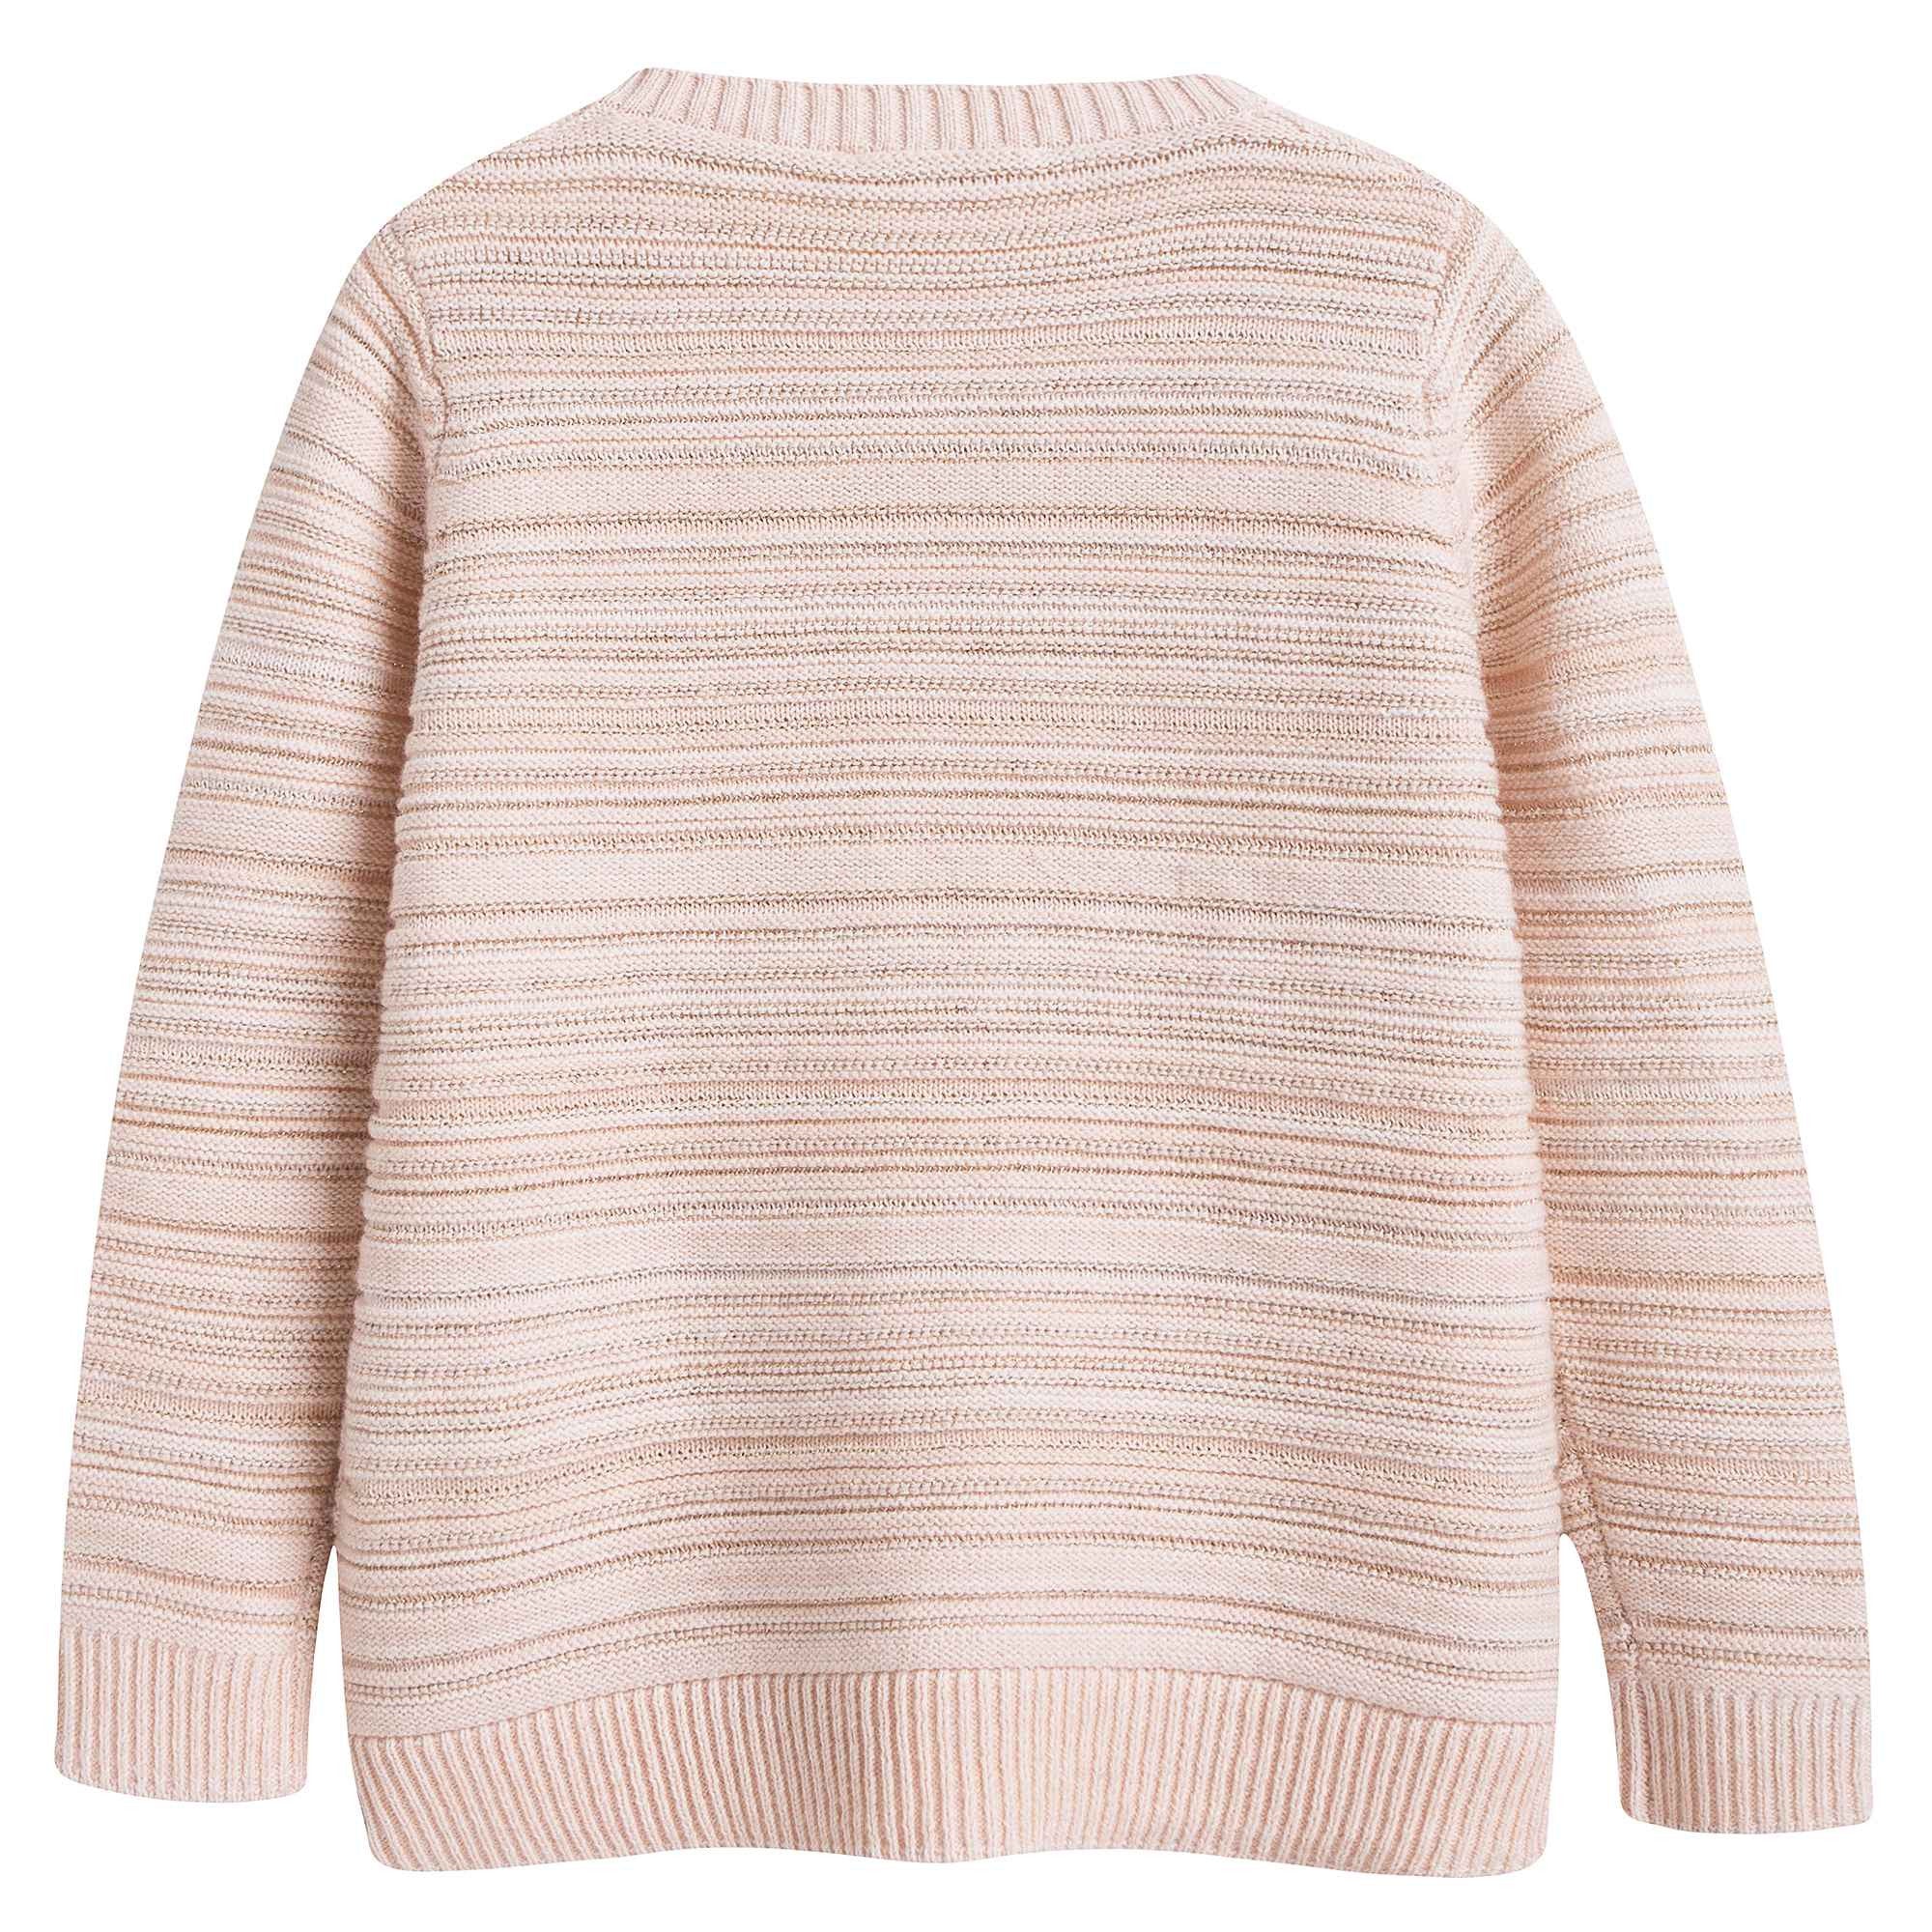 Girls Pink Stripes Knitted Cardigan